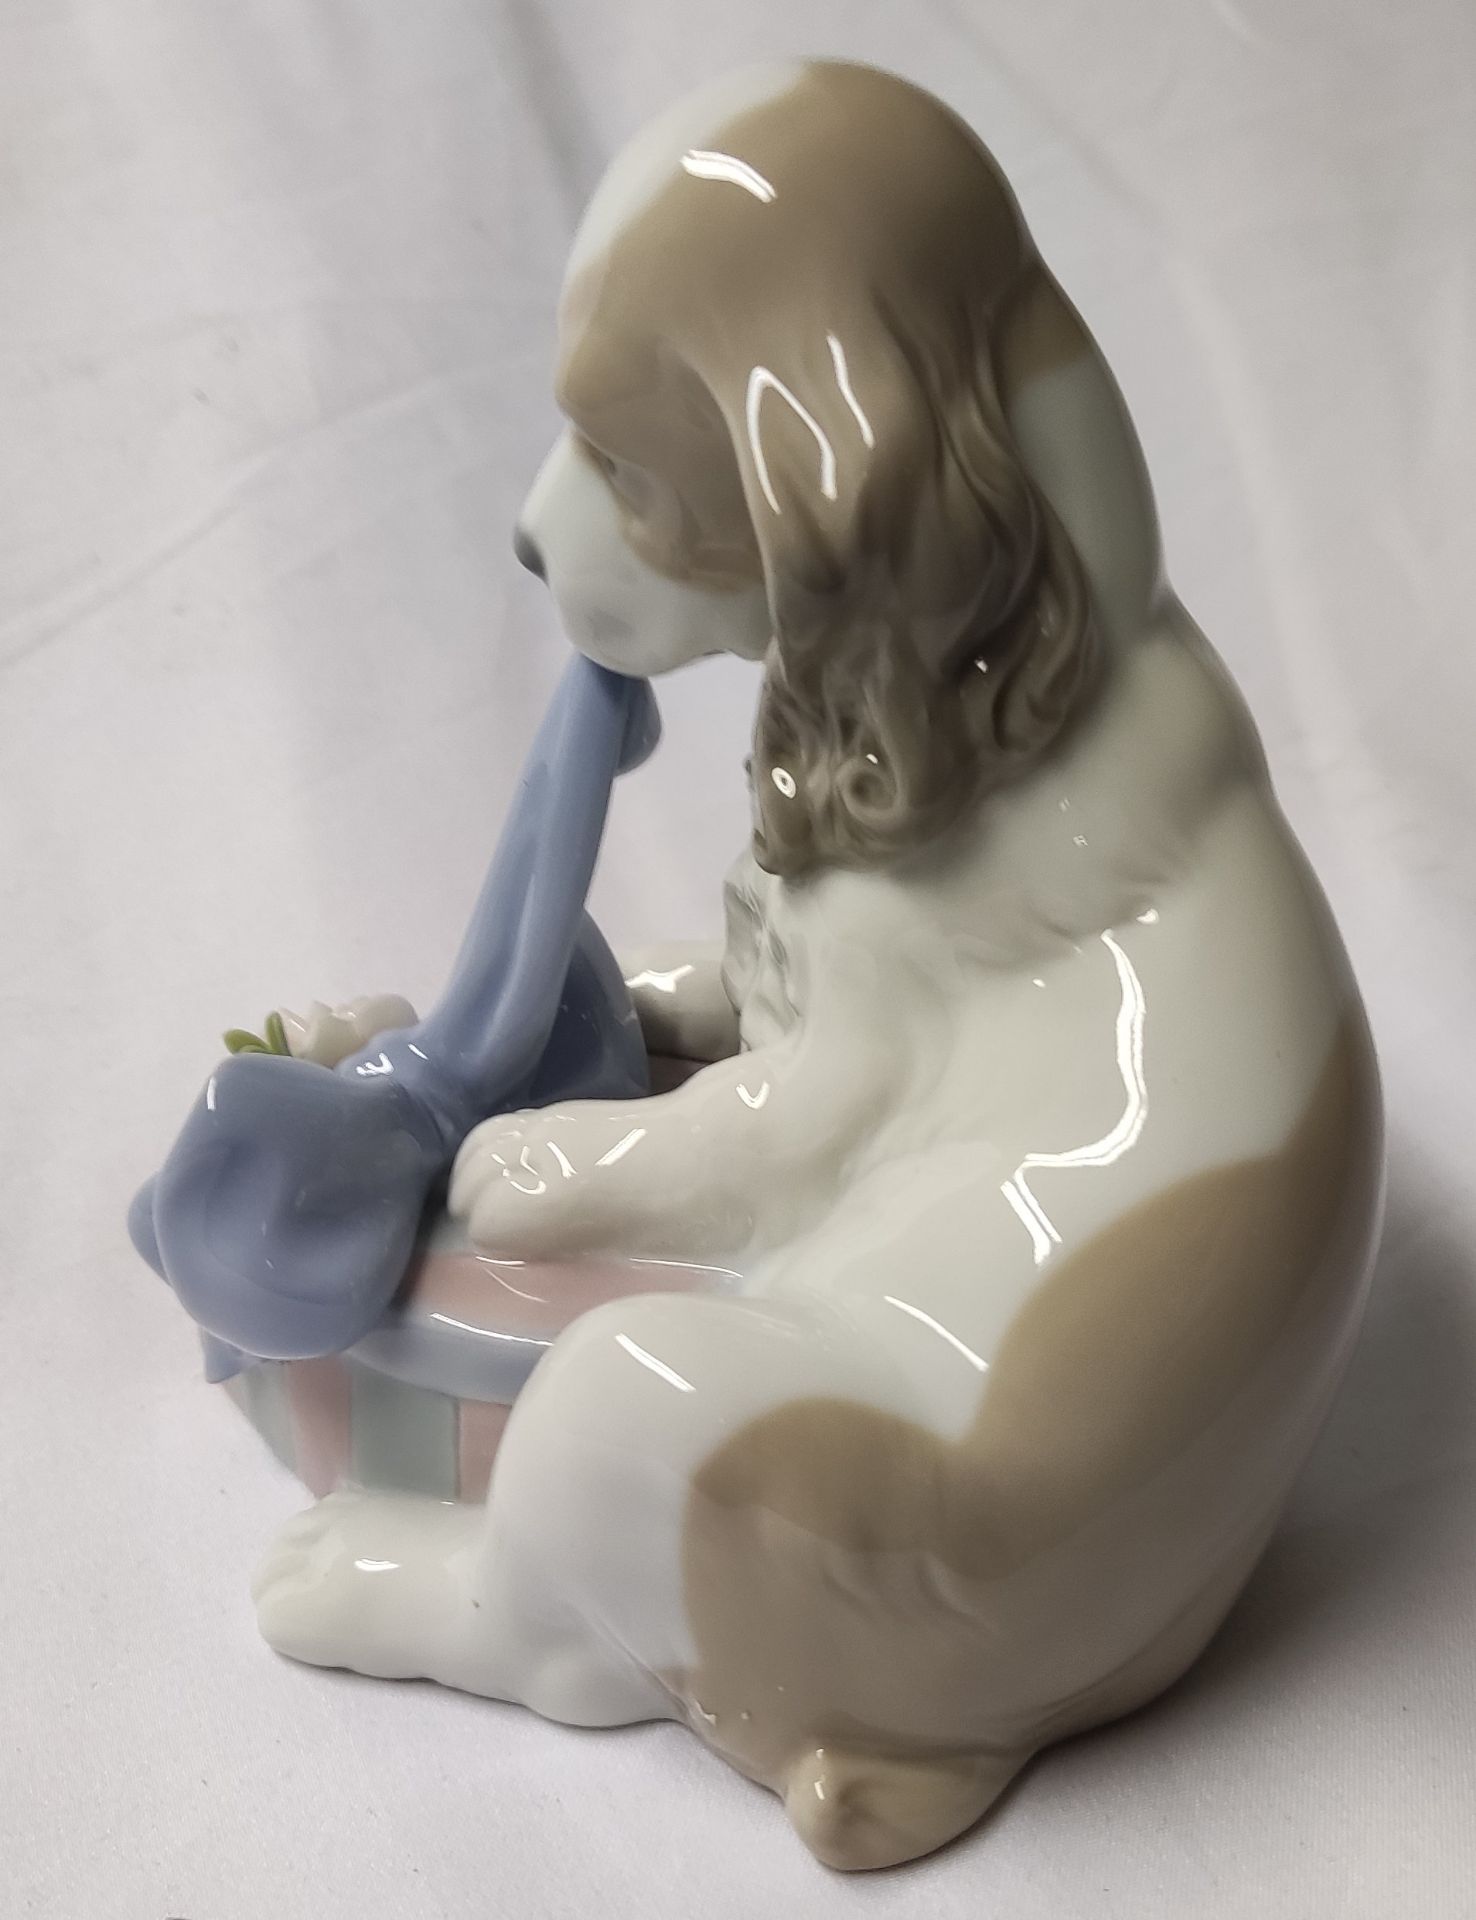 1 x LLADRO Can't Wait Puppy Dog Porcelain Figurine - New/Boxed - RRP £330 - Ref: /HOC244/HC5 - CL987 - Image 7 of 22